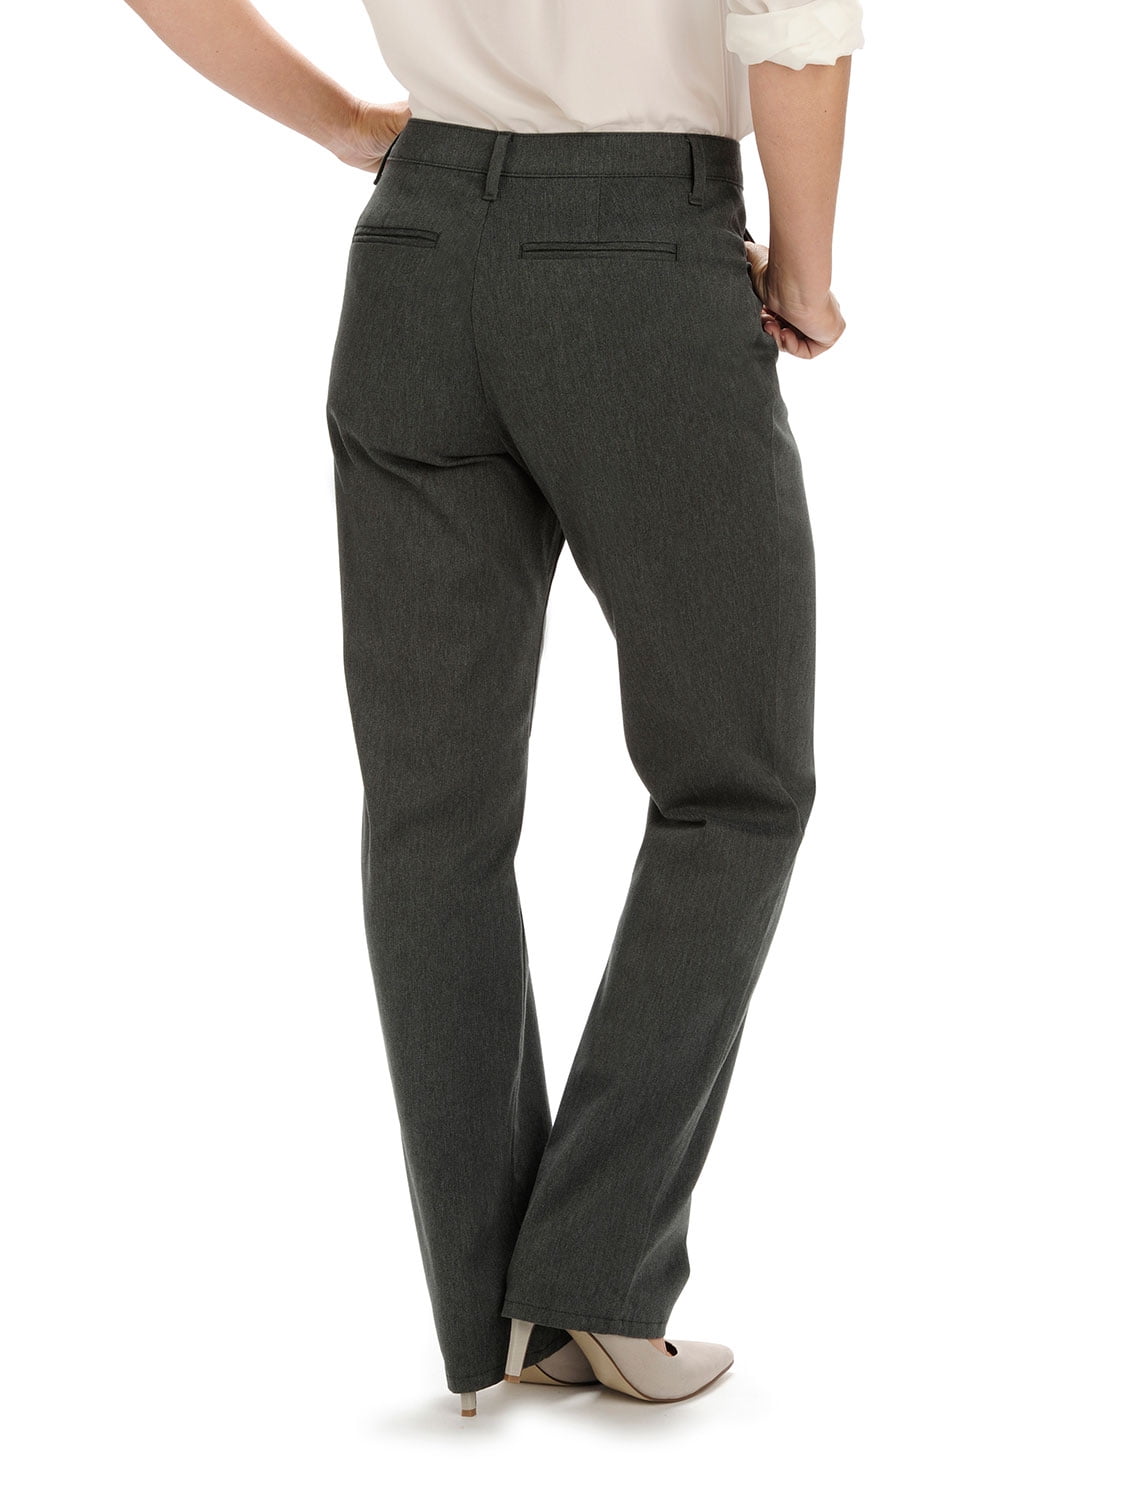 Lee Women's Relaxed Fit All Day Straight Leg Pants - Charcoal, Charcoal  Heather, 16 Short - Walmart.com